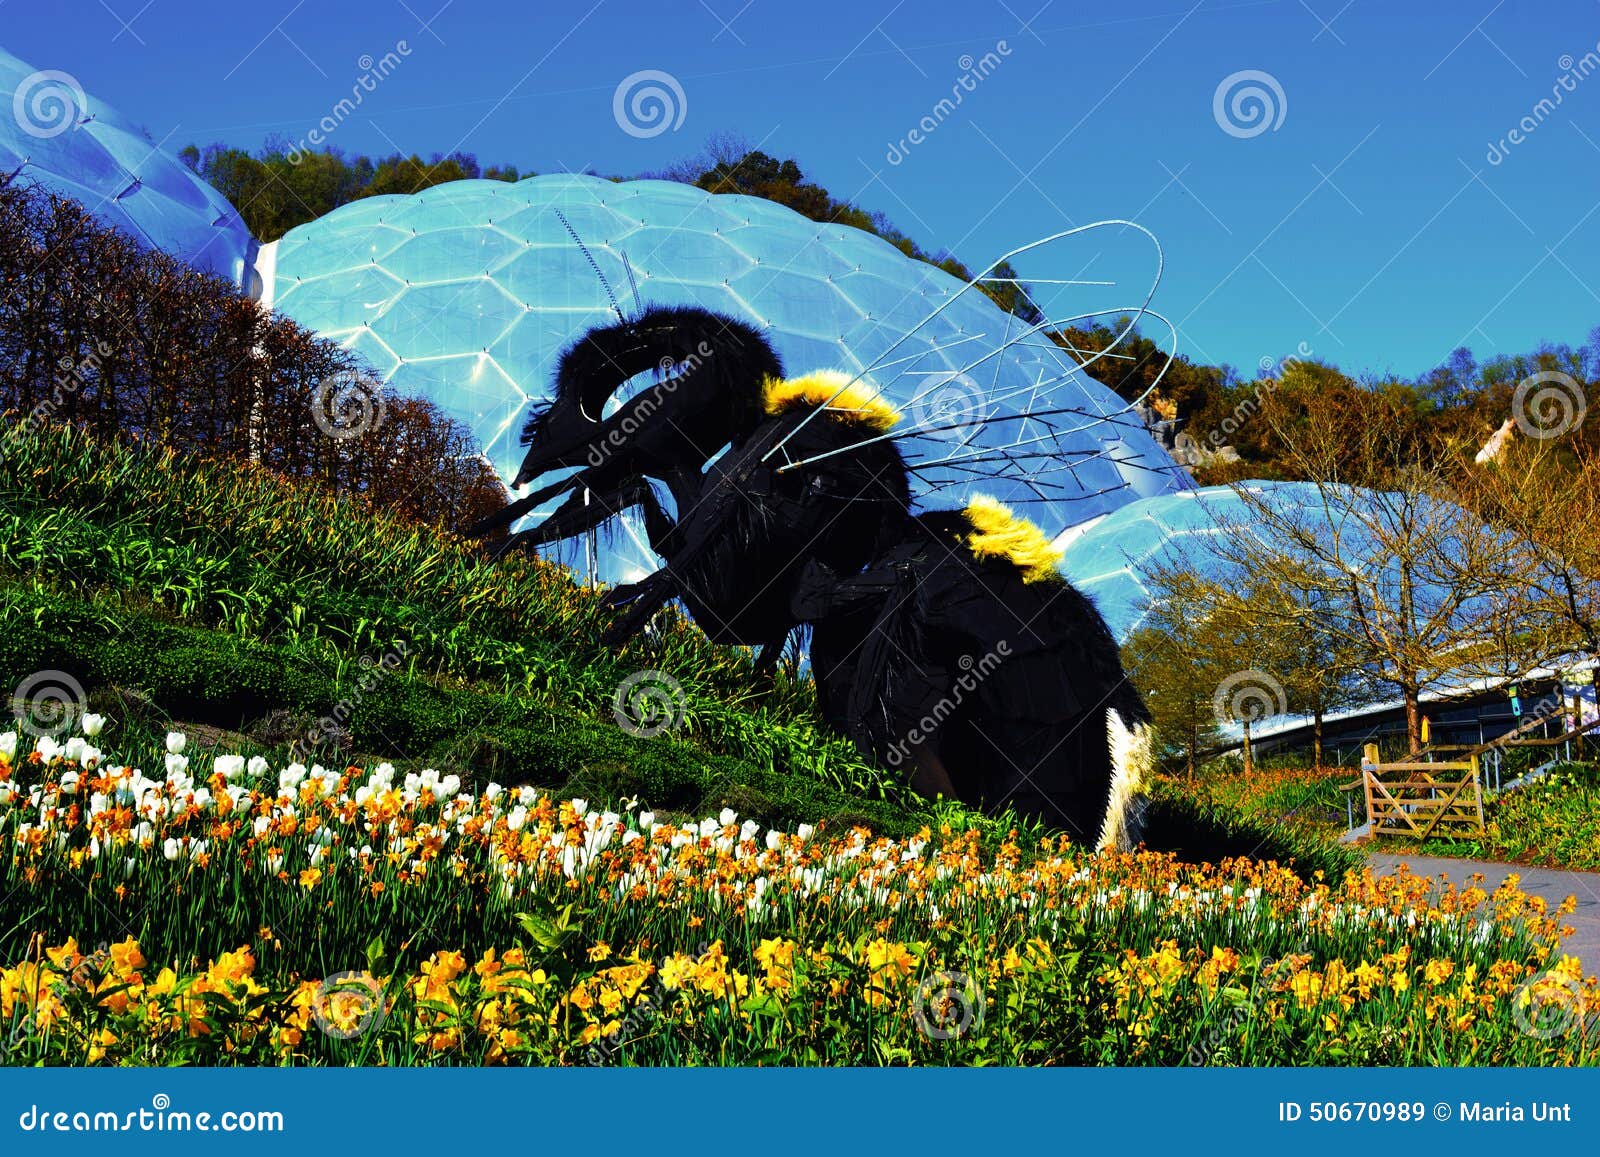 giant bee at the eden project in cornwall, england